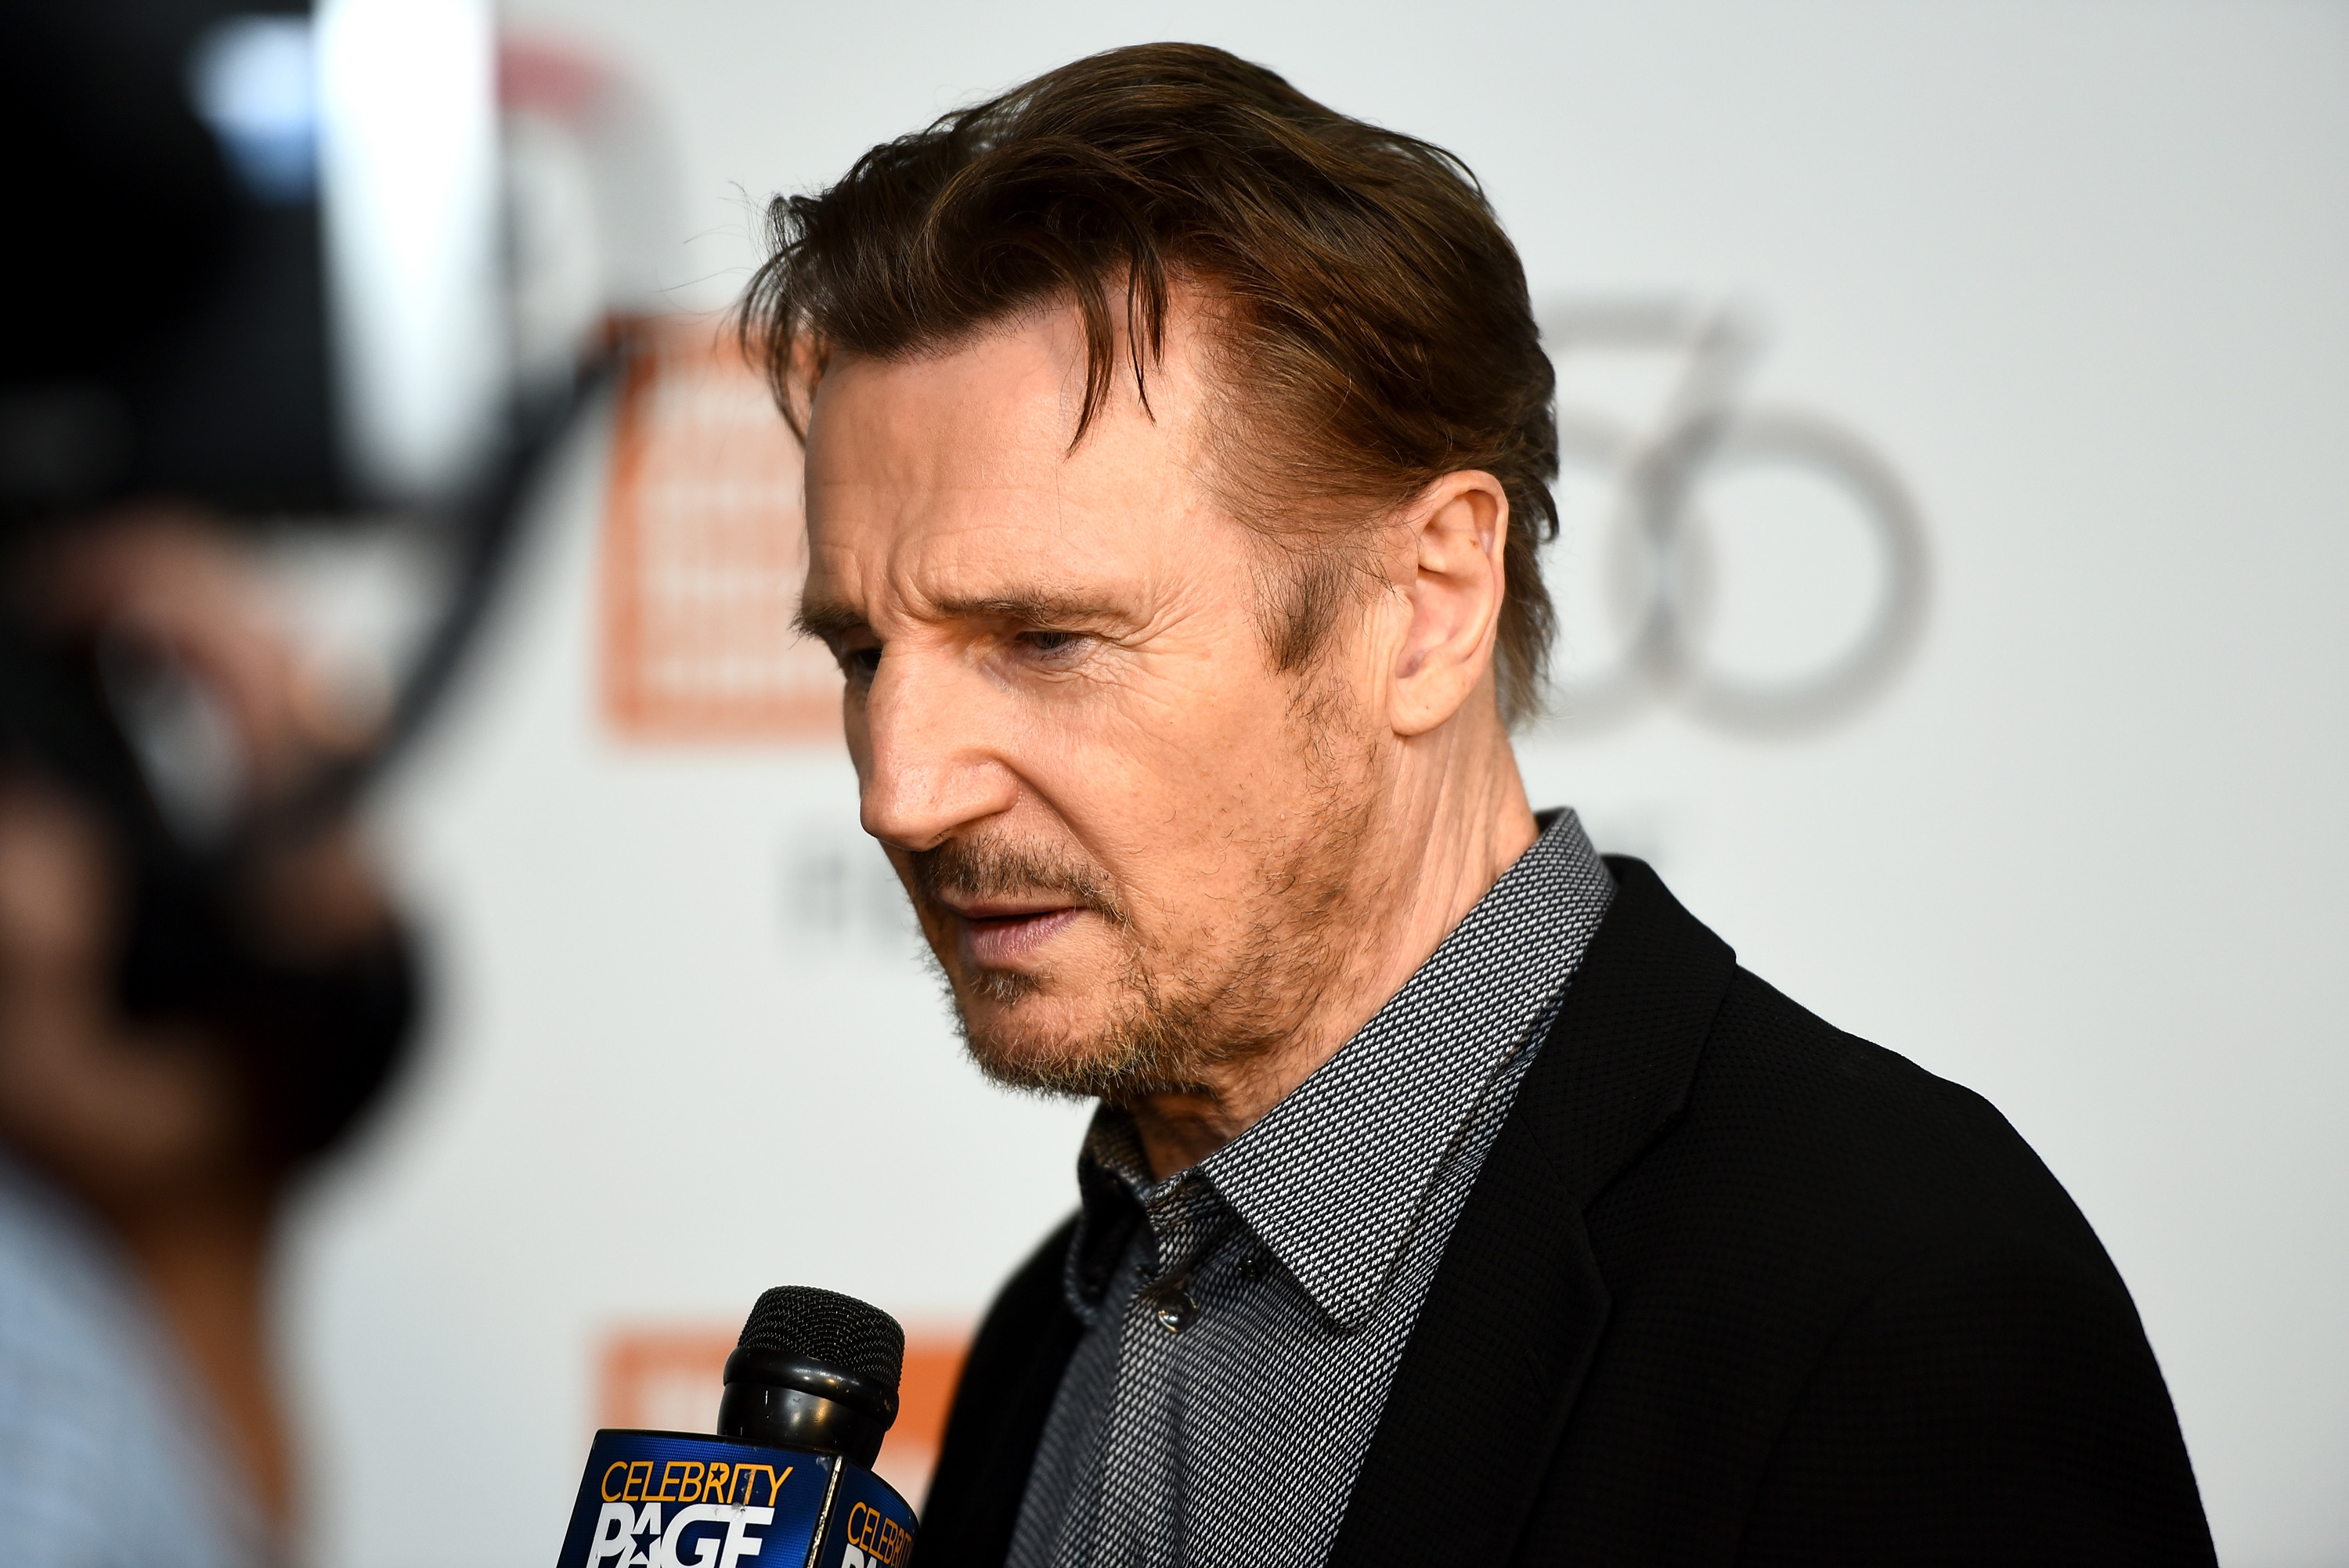 Liam Neeson upsets Narnia fans by claiming Aslan could also be